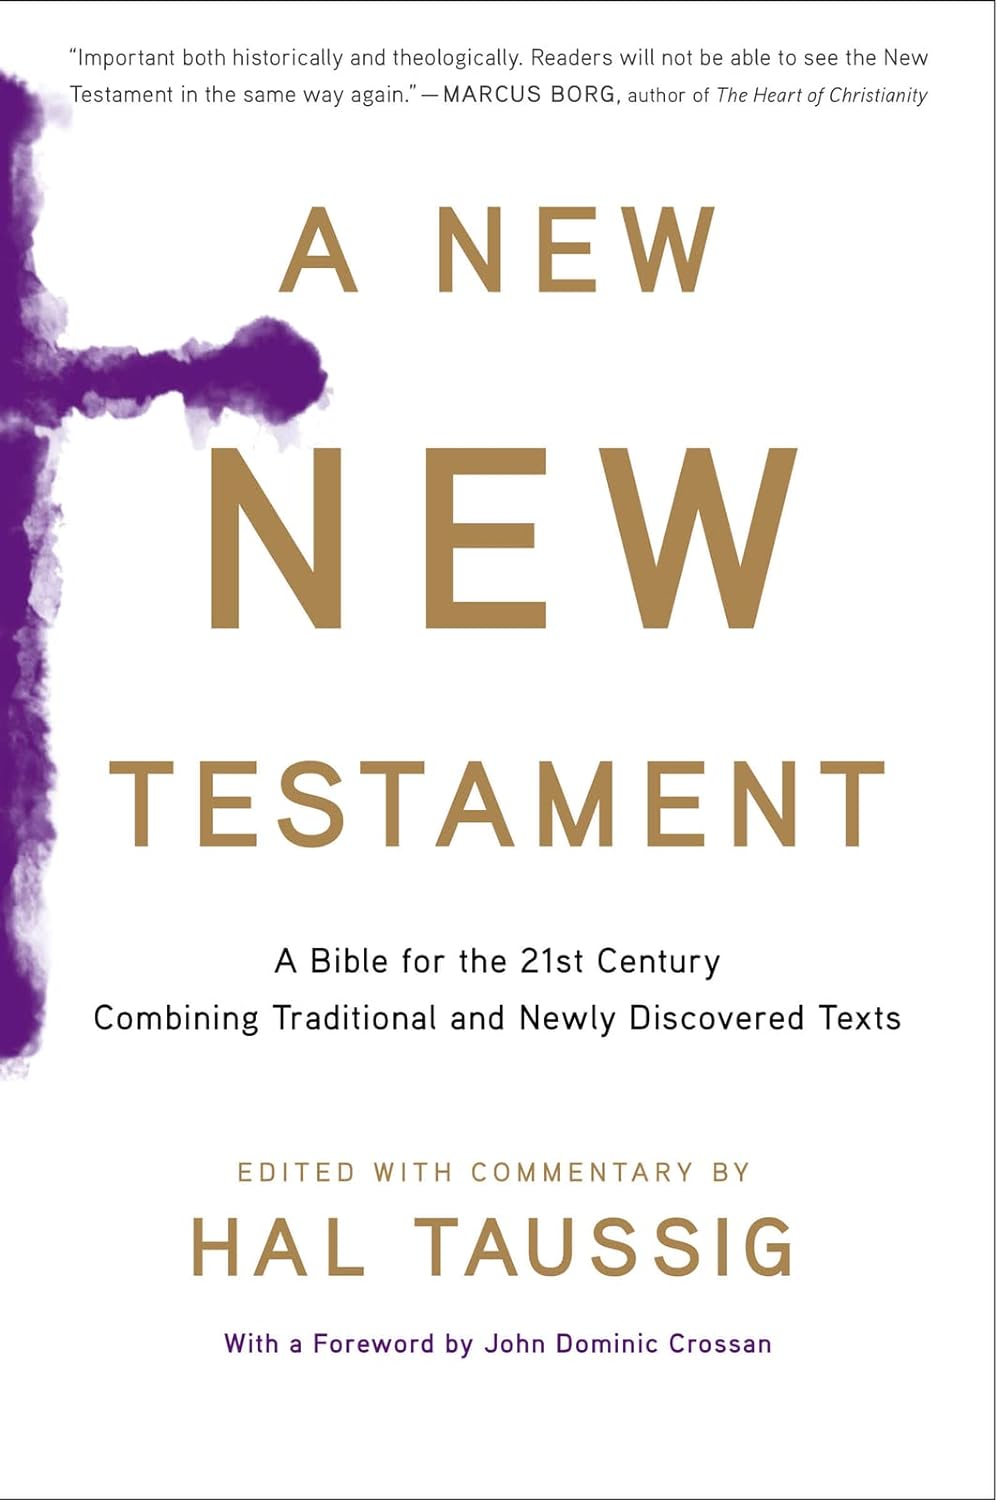 A New New Testament : Commentary By Hal Taussig